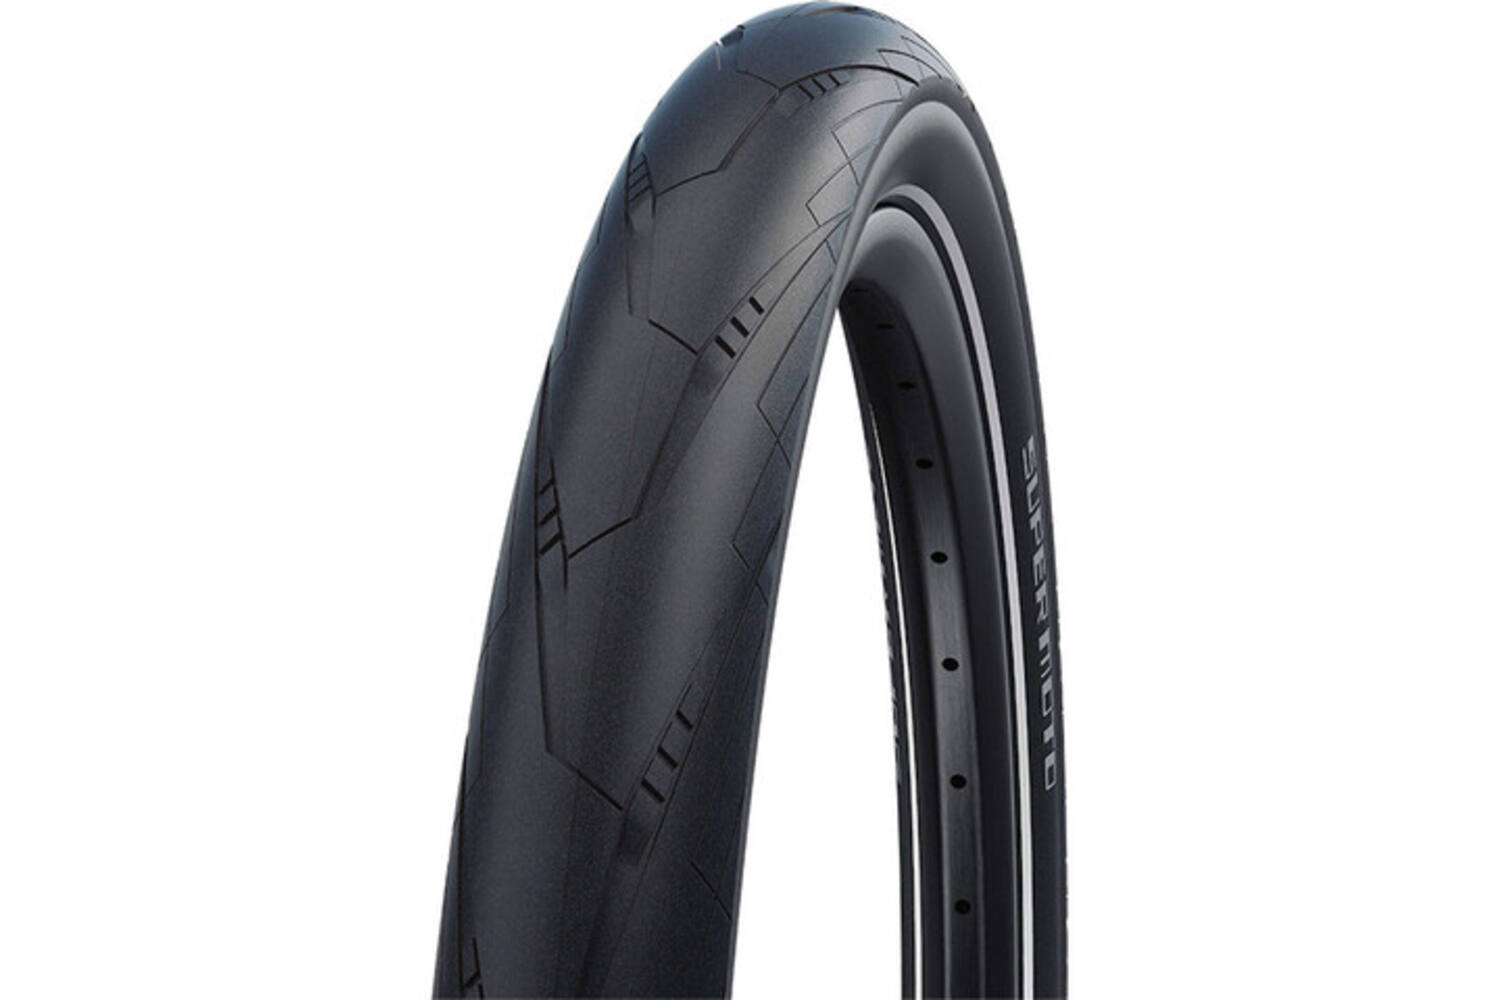 <a href="https://cycles-clement.be/product/pneu-super-moto-27-5x2-40-perf-reflex/">PNEU SUPER MOTO 27.5X2.40 PERF REFLEX</a>